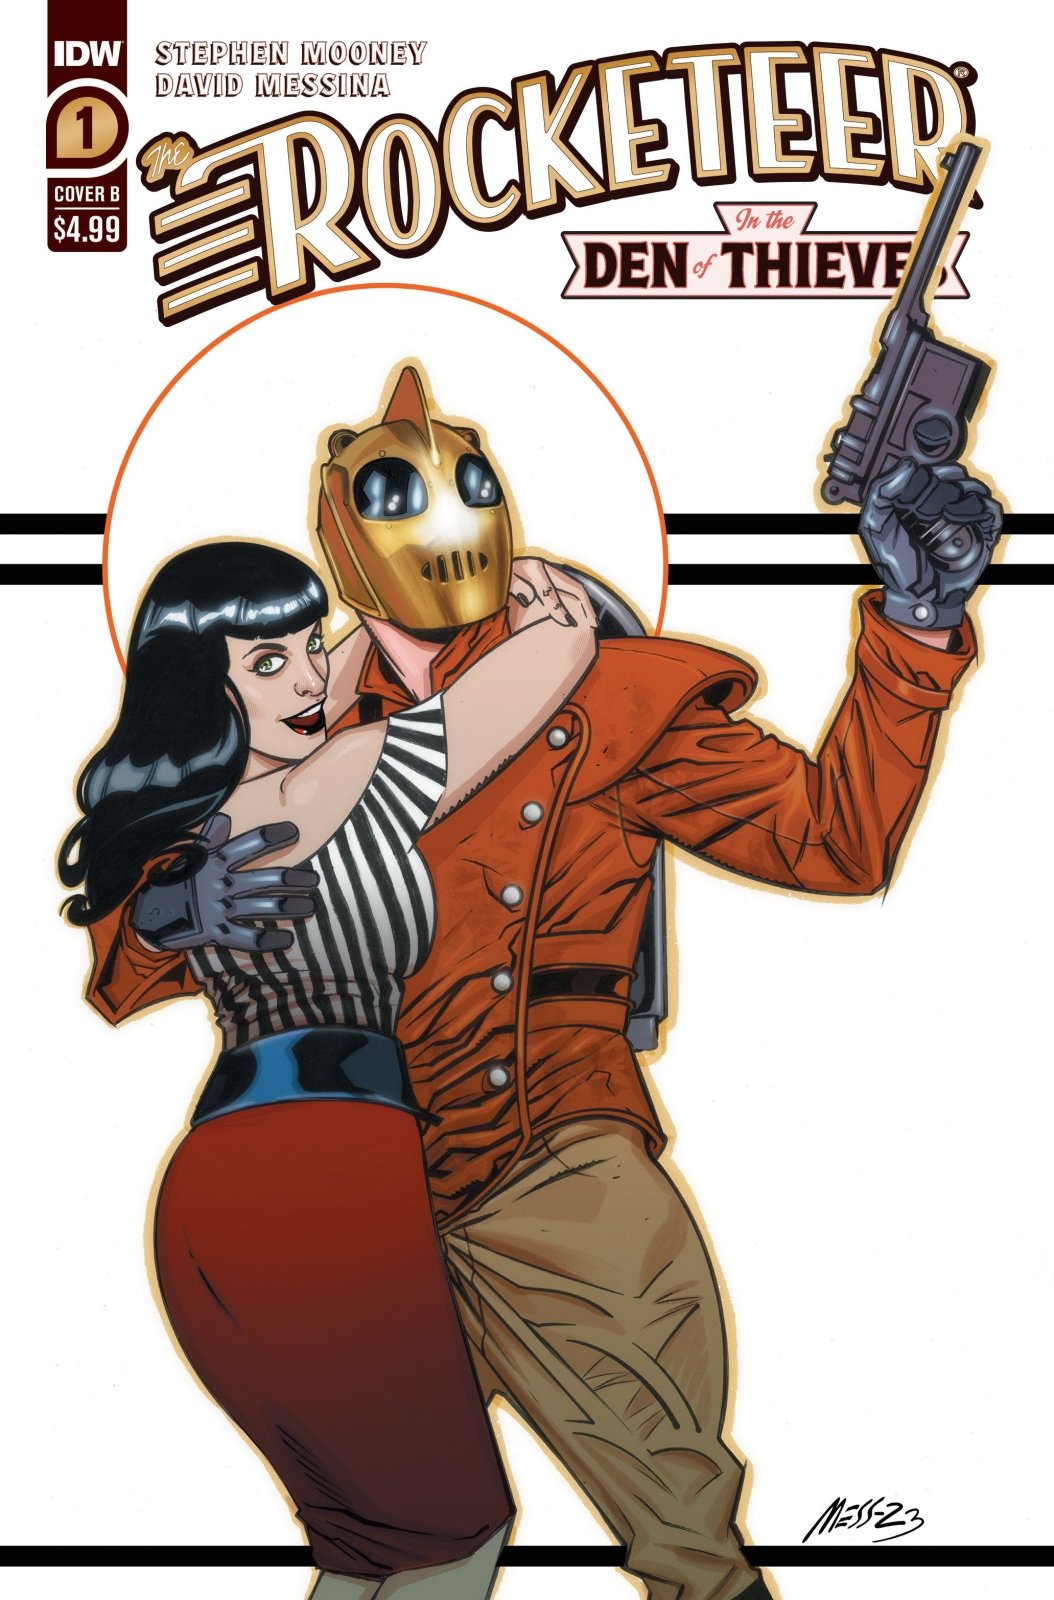 The Rocketeer: In The Den Of Thieves #1 Variant B (Messina) - The Fourth Place